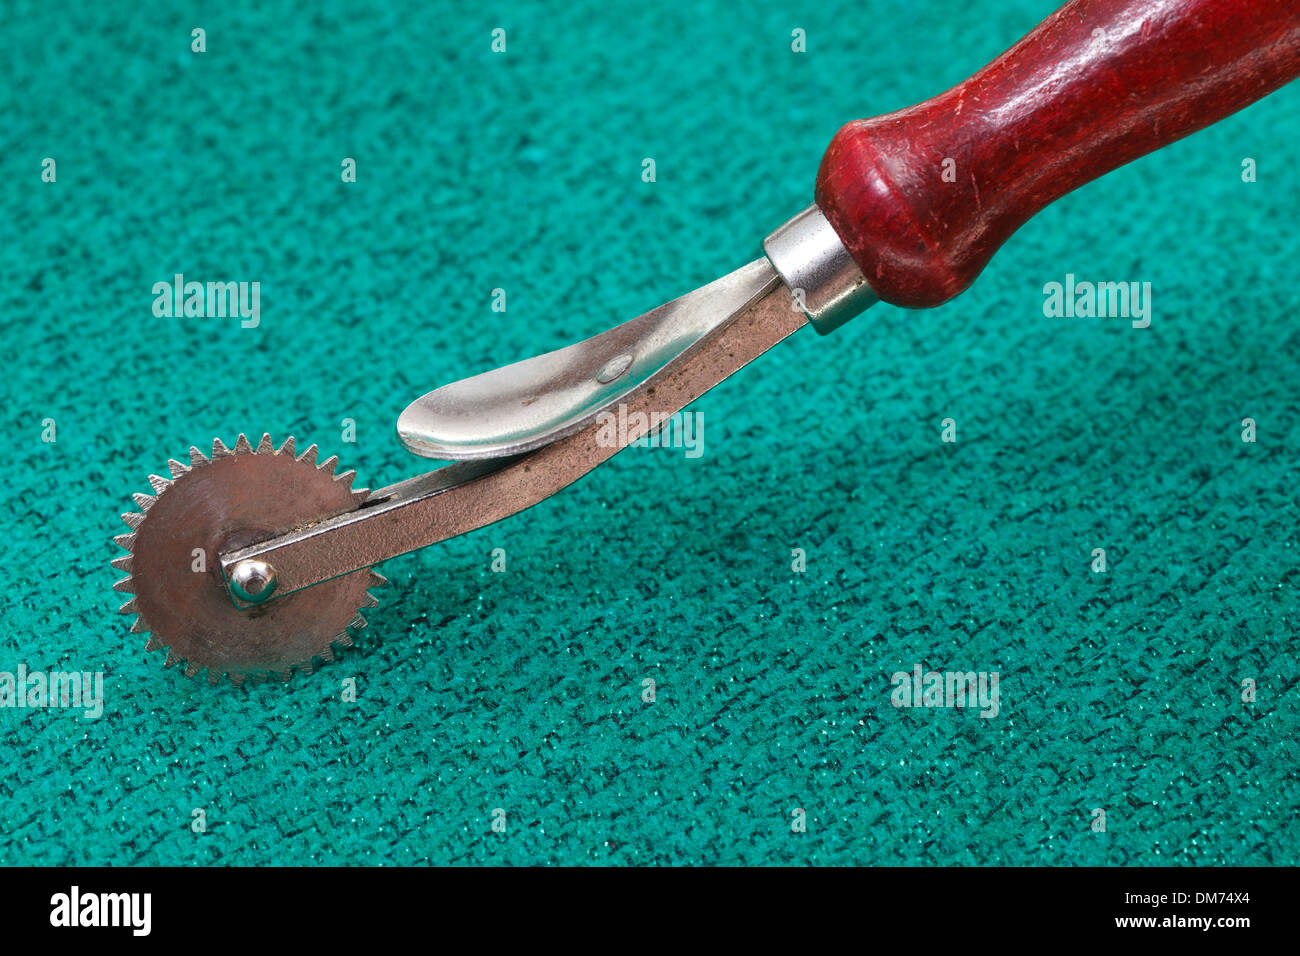 Isolated Old Tracing Wheel Stock Photo - Download Image Now - Cut Out,  Horizontal, No People - iStock